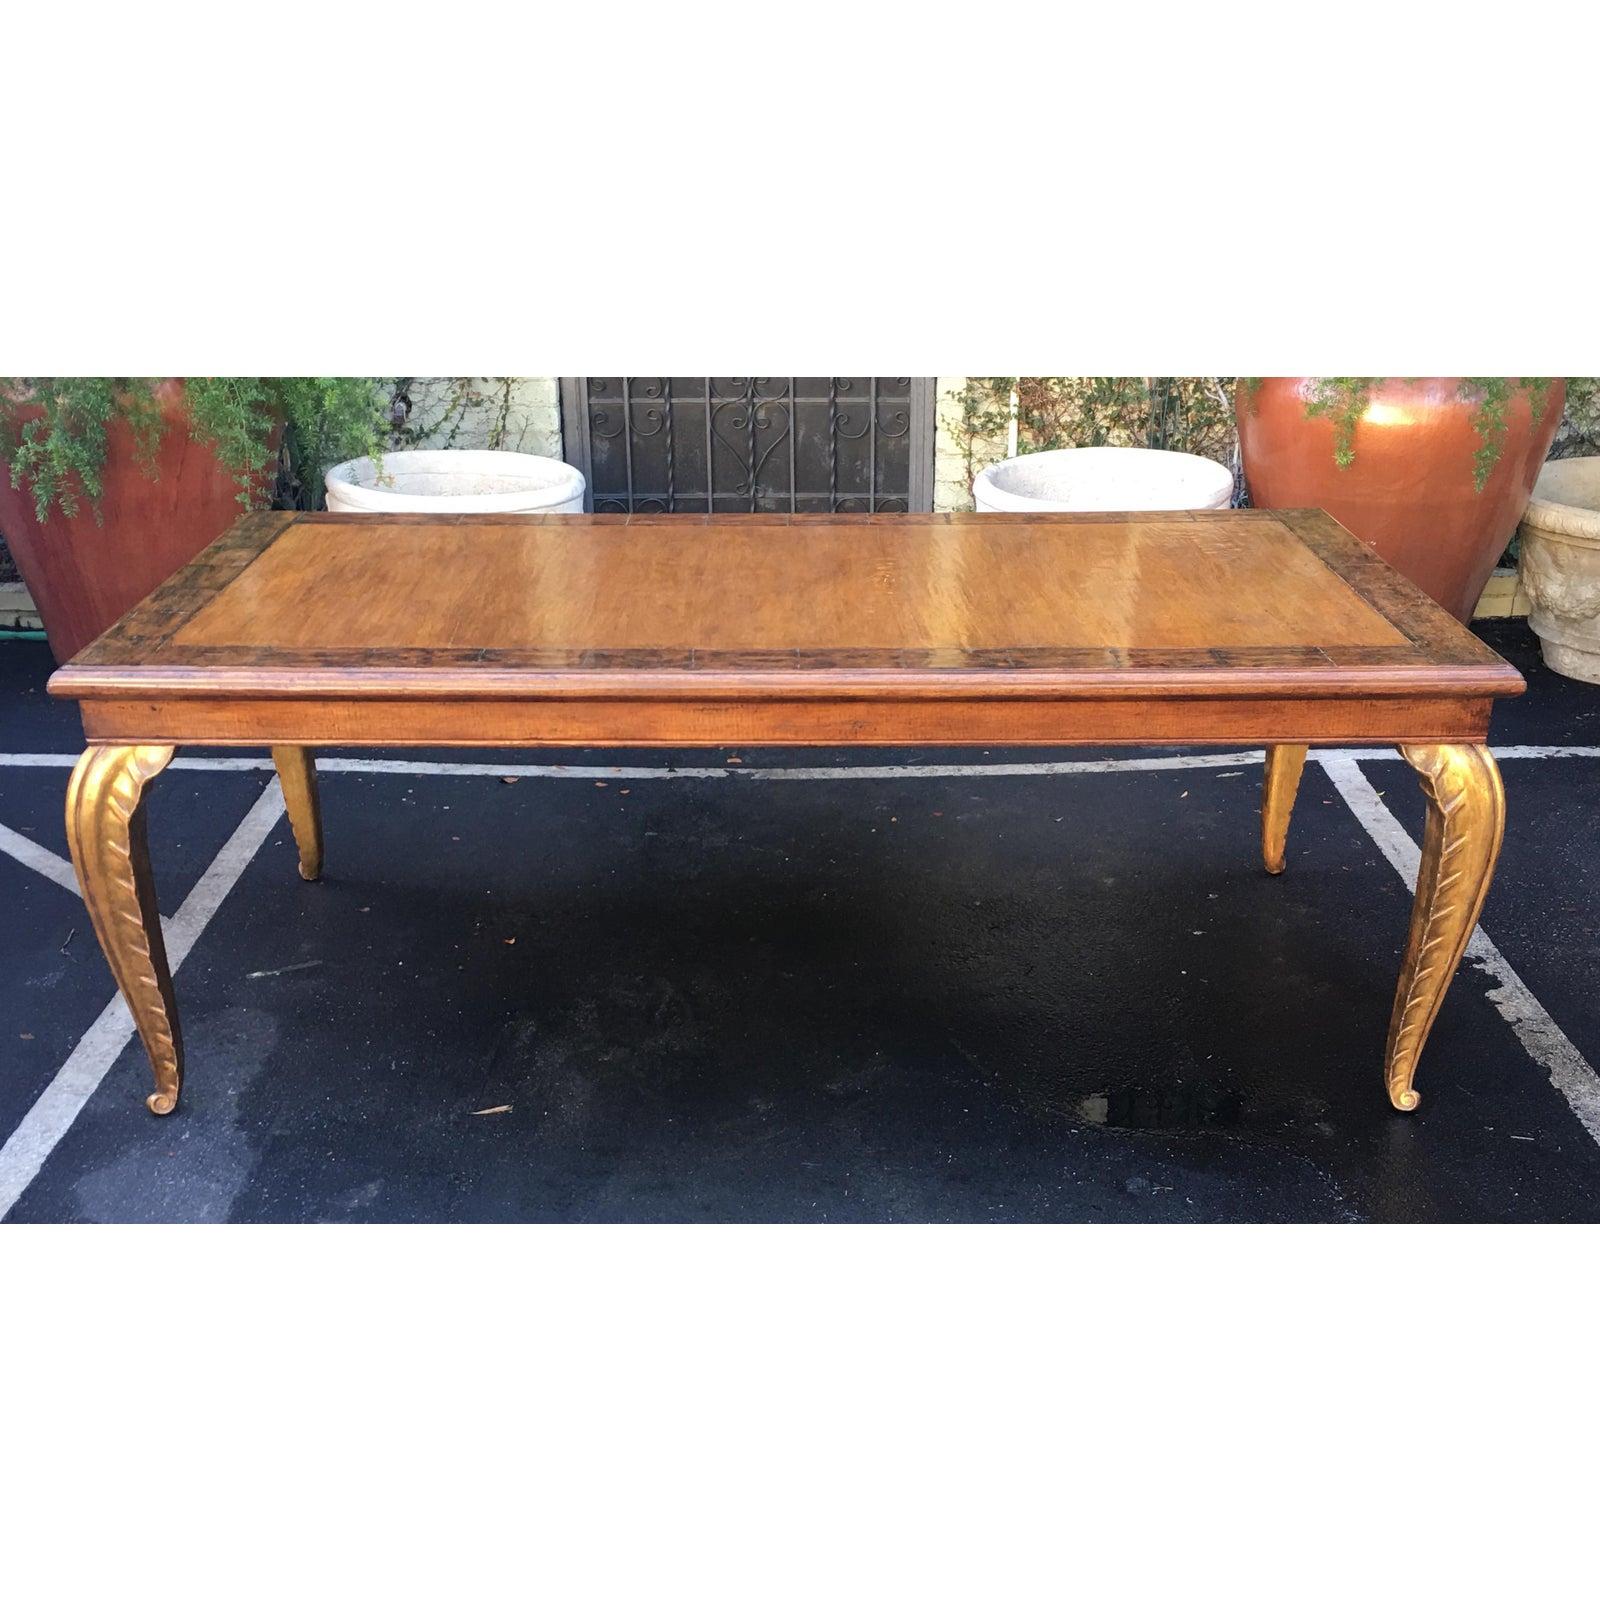 Carved French dining table with giltwood palm leaf legs by Randy Esada.

​Note: Custom orders require a deposit and cannot be canceled.  All custom order deposits are non-refundable.  